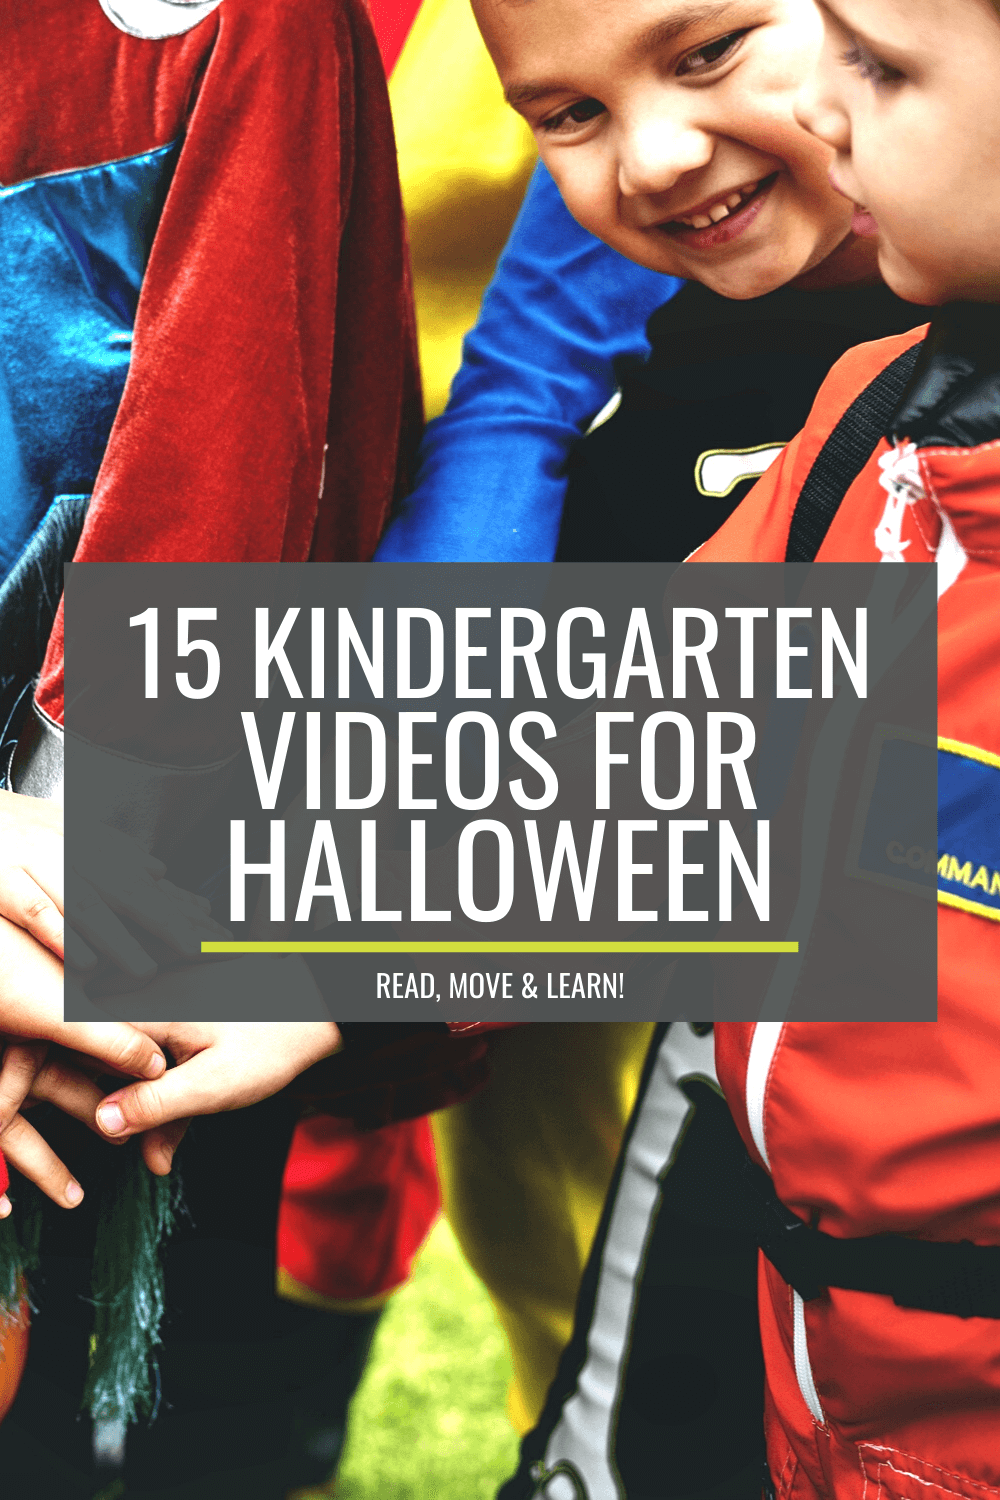 15 Kindergarten Videos for Halloween - Read, Move and Learn!